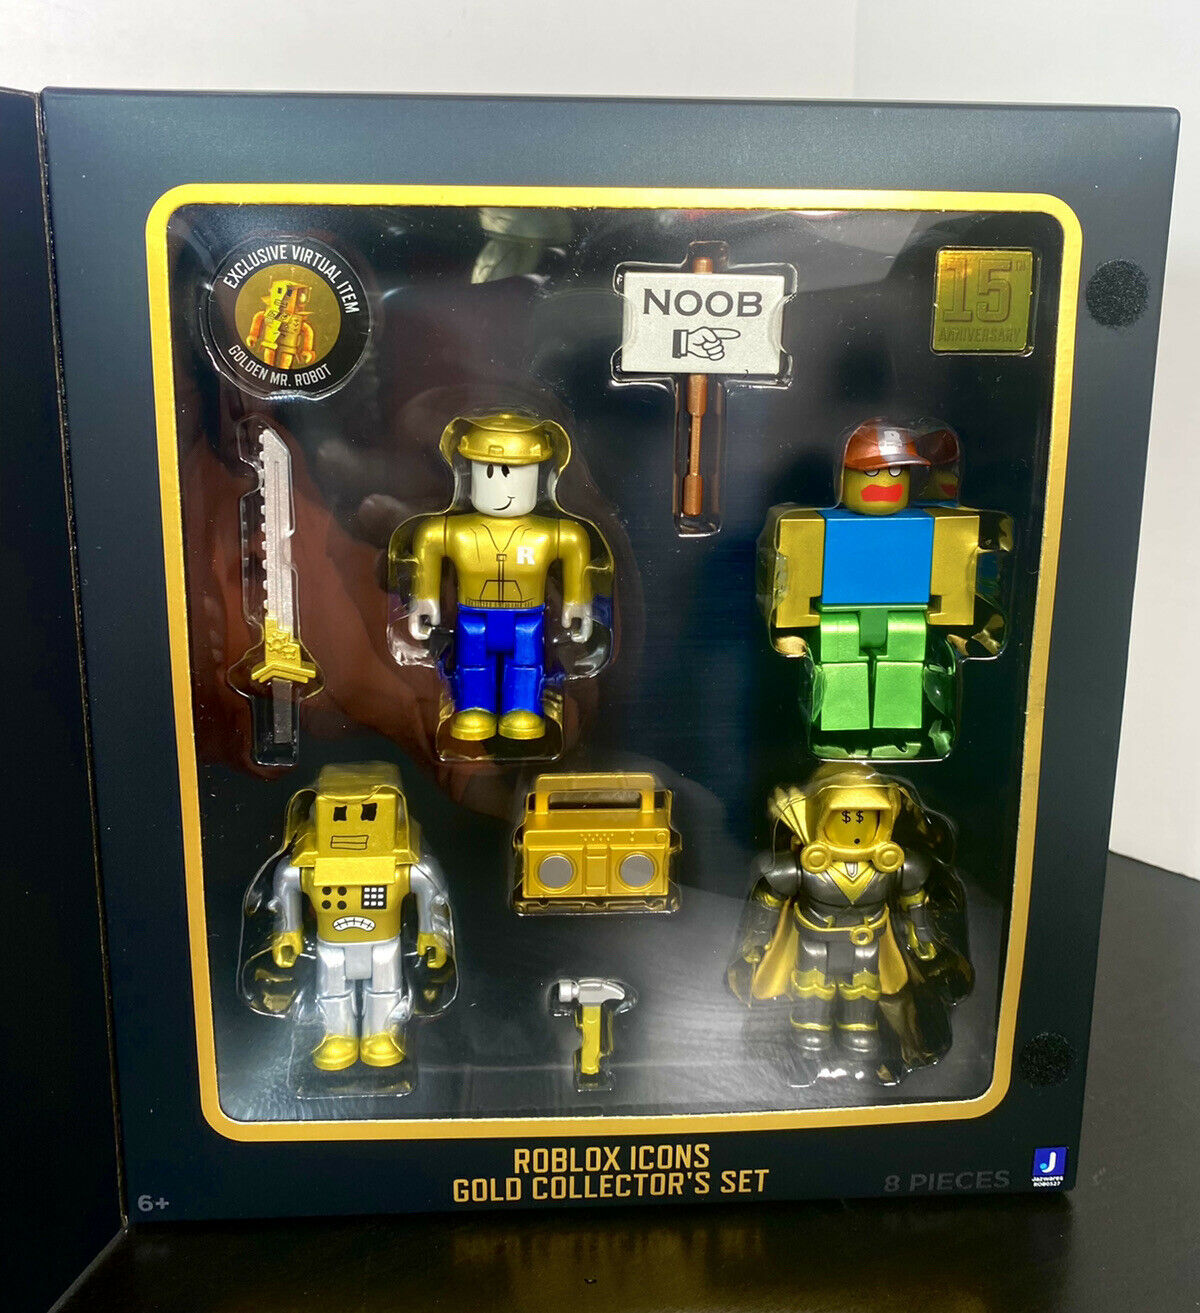  Roblox Action Collection - 15th Anniversary Roblox Icons Gold  Collector's Set [Includes Exclusive Virtual Item]